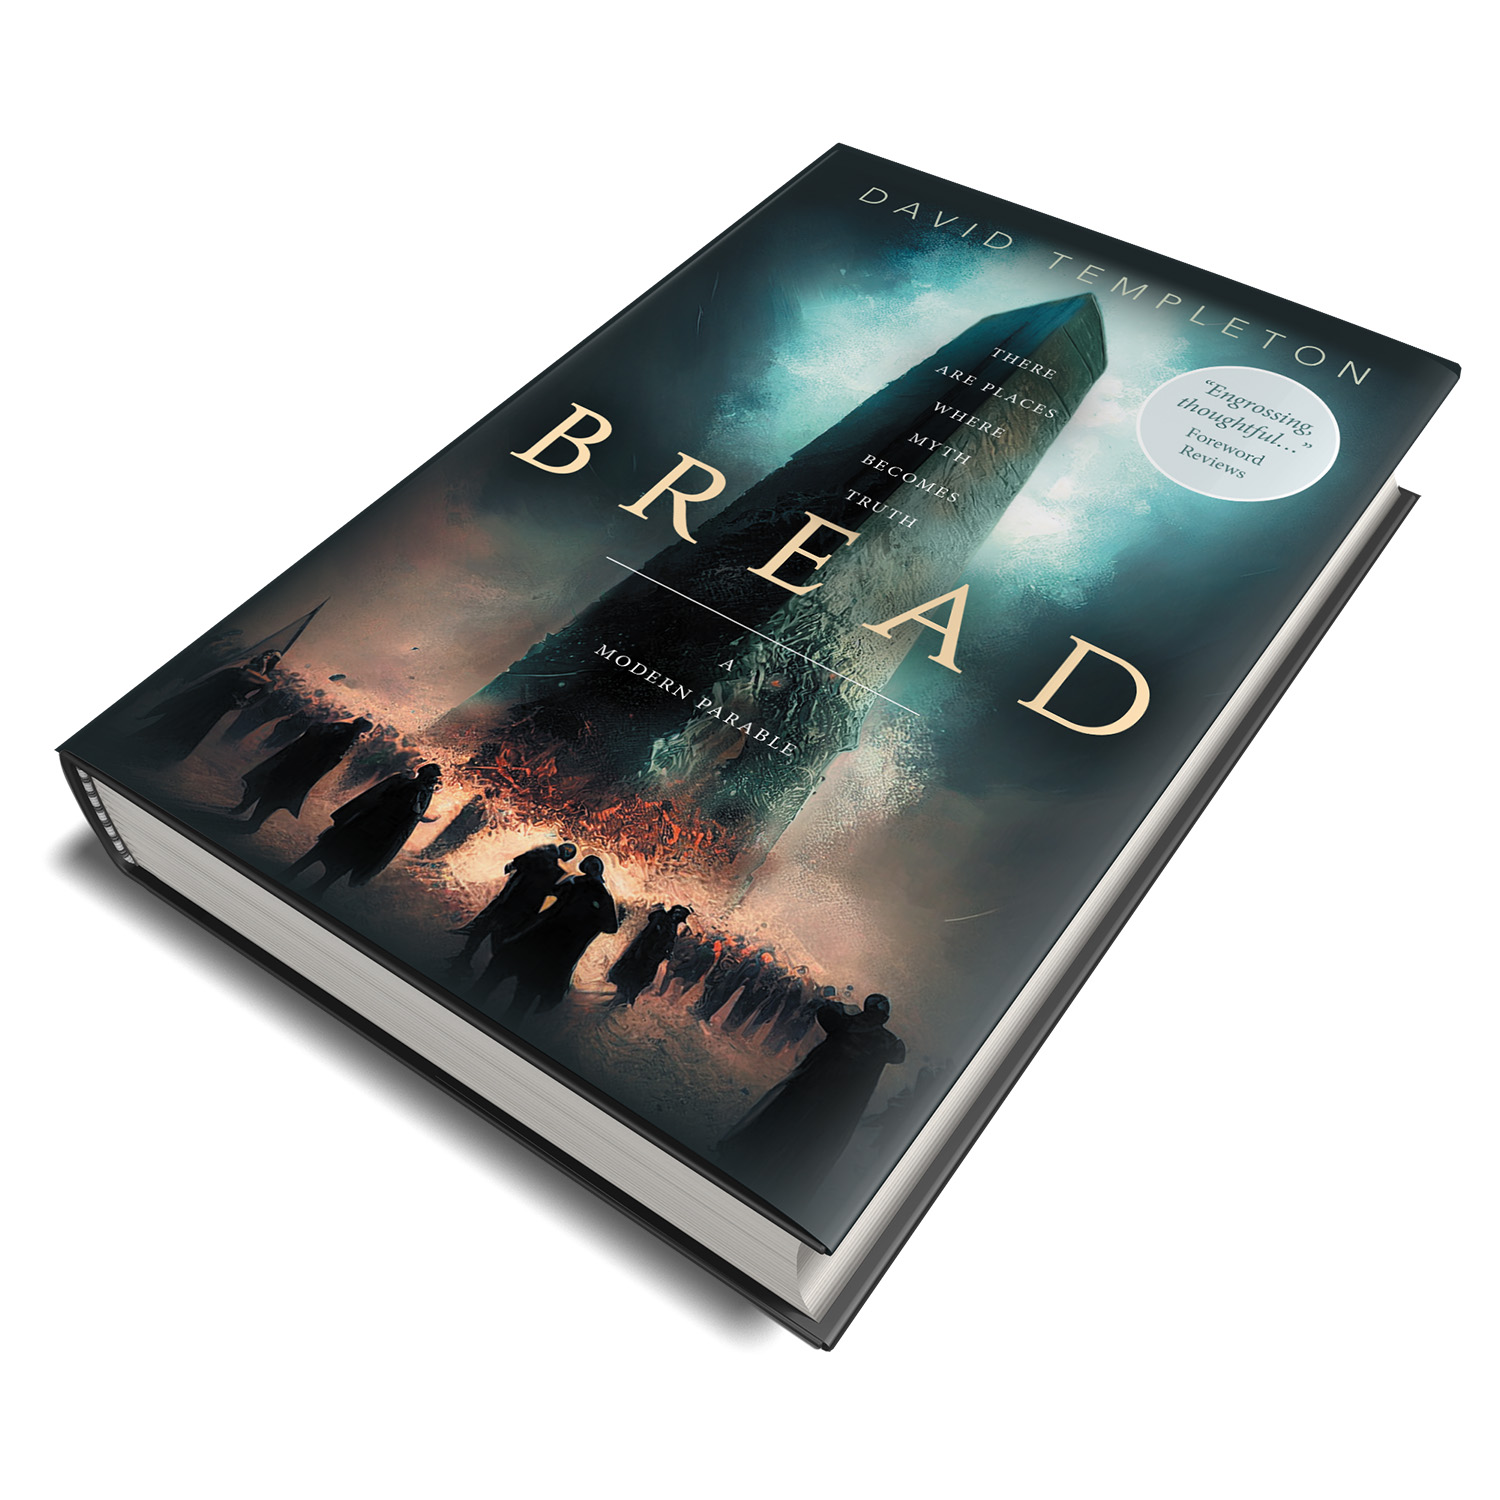 'BREAD' is a metaphysical novella that looks at the human experience. The author is David Templeton. The cover design and interior formatting are by Mark Thomas of coverness.com. To find out more about my book design services, please visit www.coverness.com.